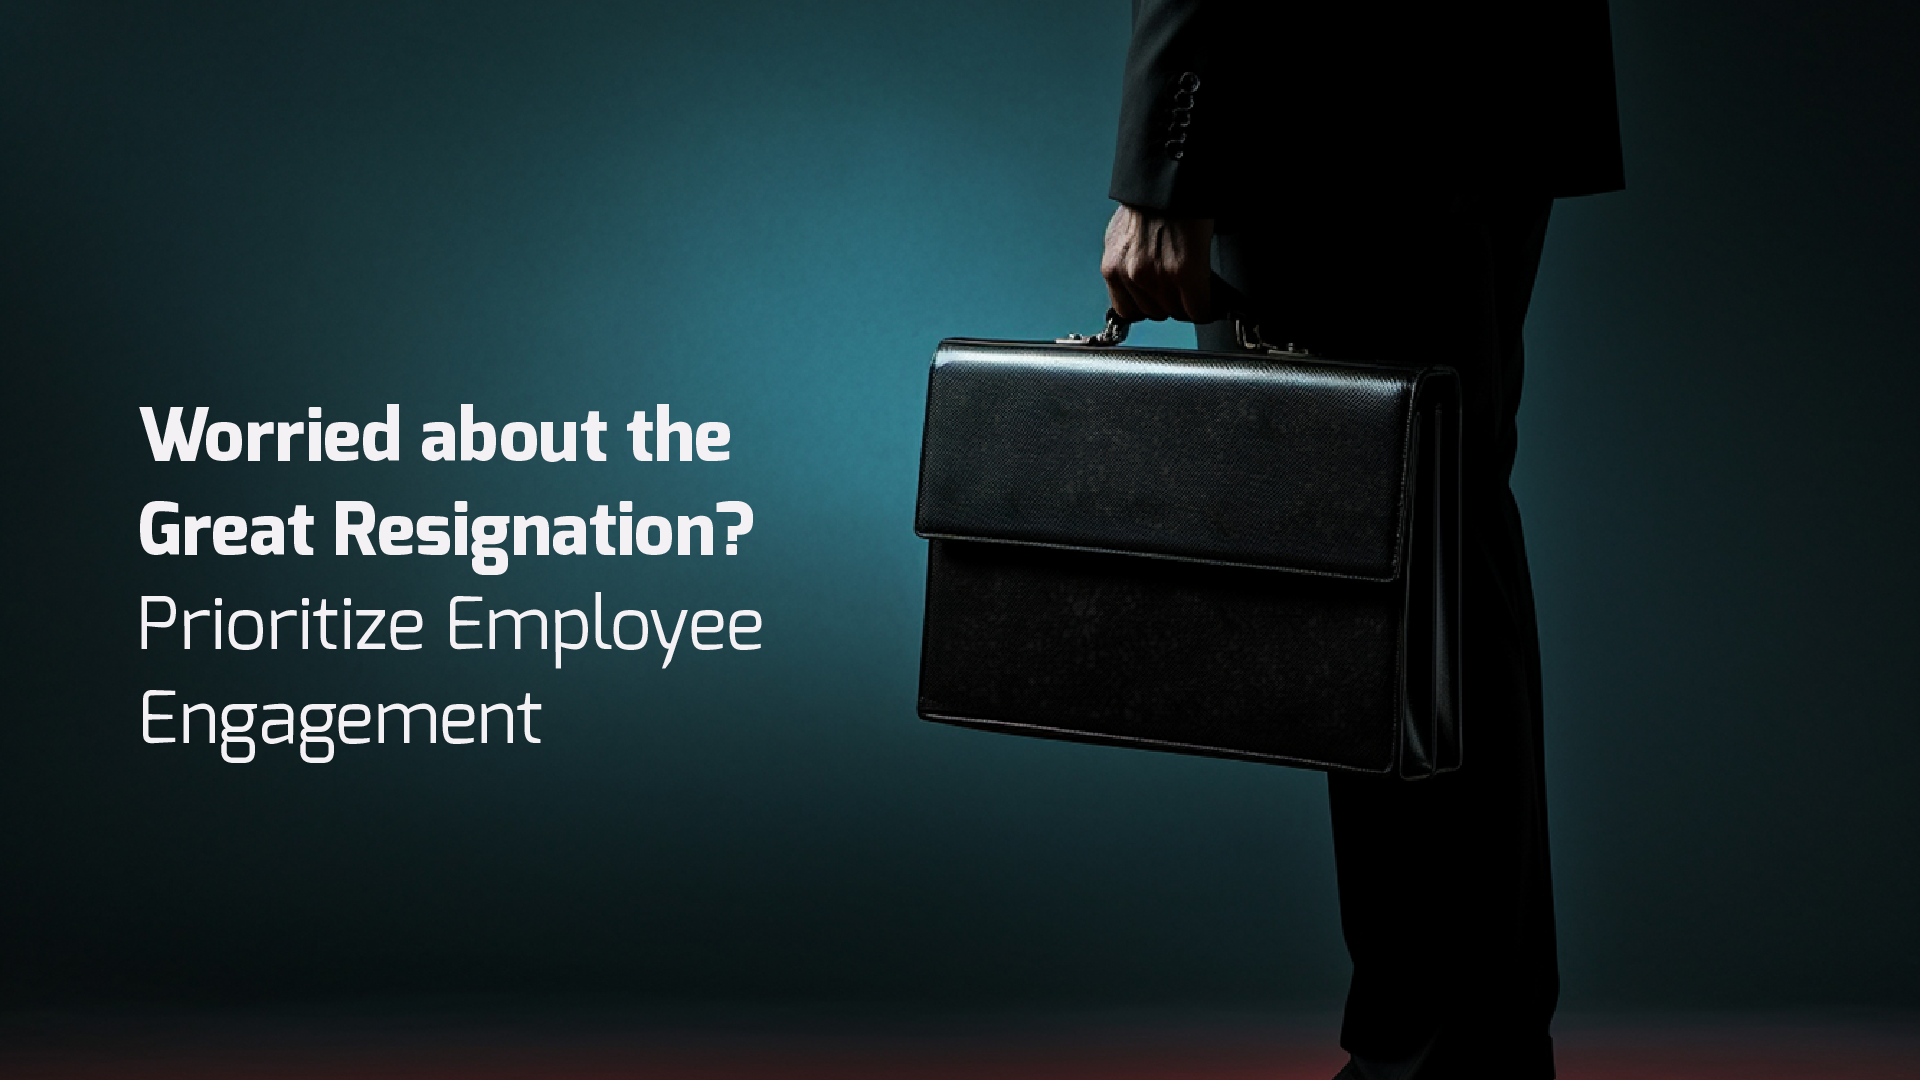 Worried about the Great Resignation? Prioritize Employee Engagement